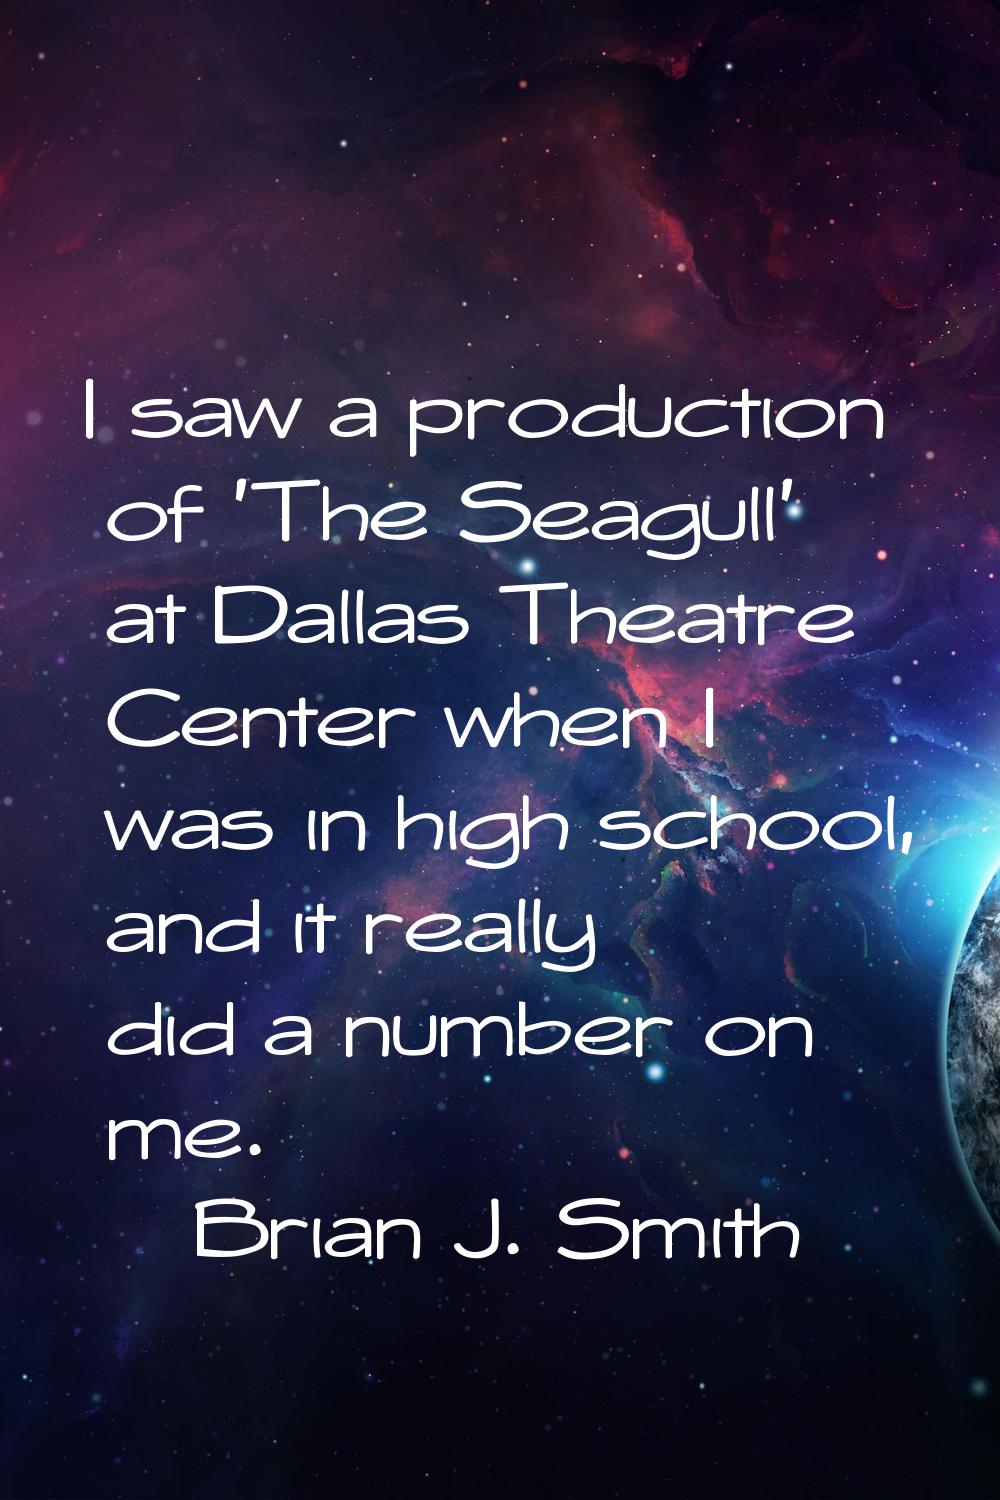 I saw a production of 'The Seagull' at Dallas Theatre Center when I was in high school, and it real